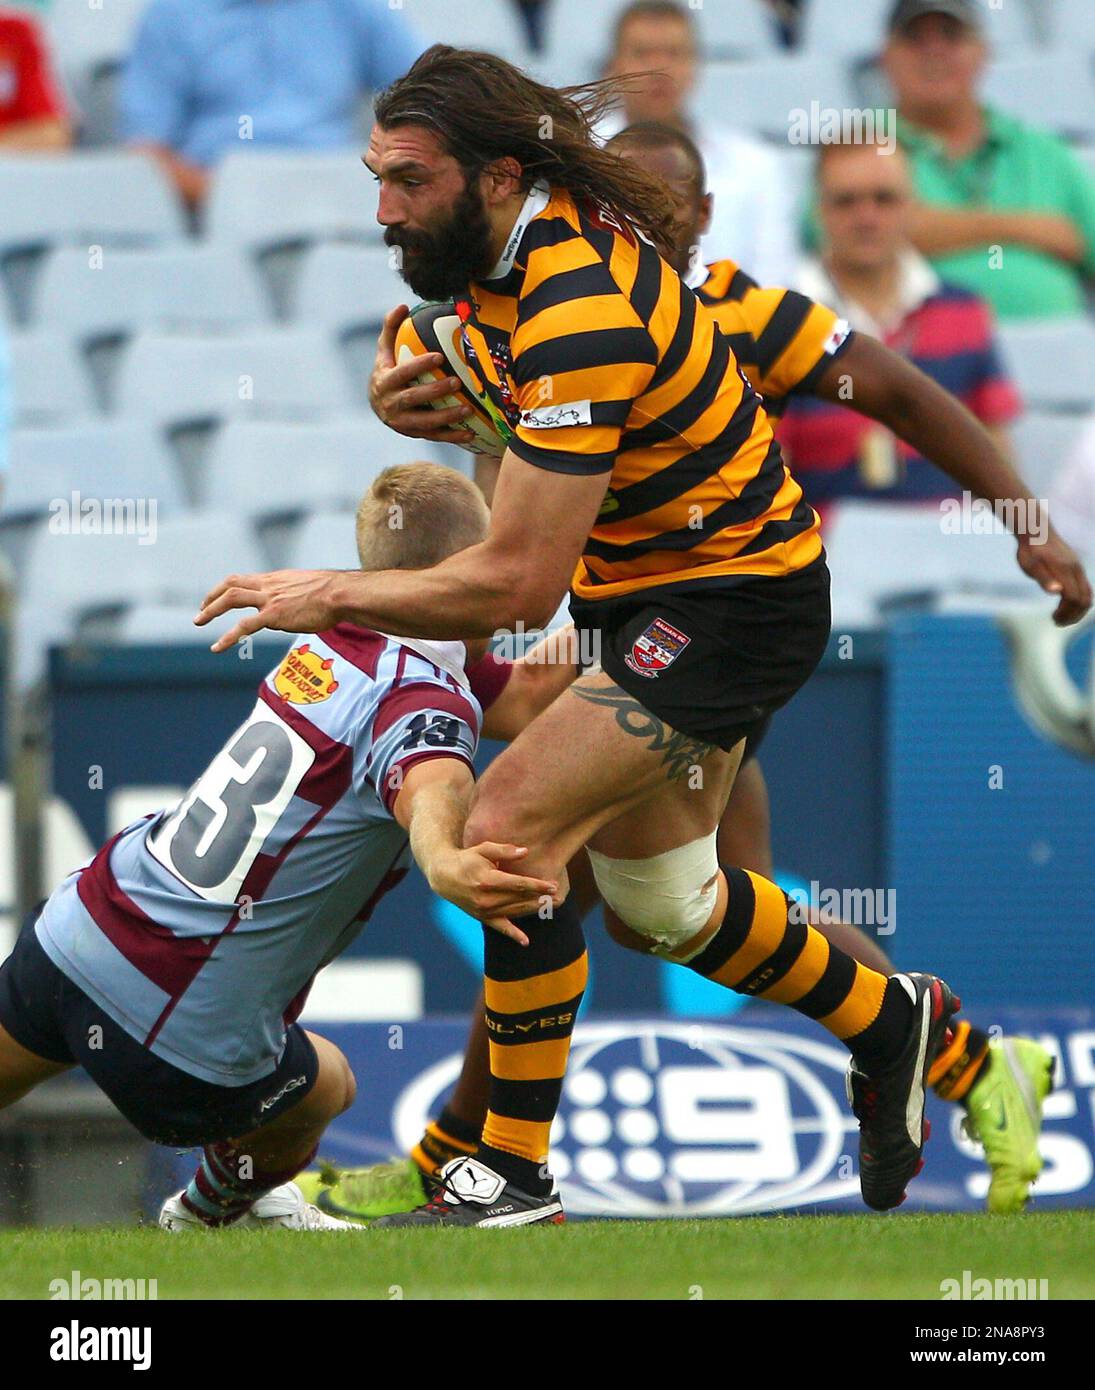 French rugby player Sebastien Chabal, playing for Balmain, right, breaks  through the tackle by Petersham's James Walsh during a club rugby game  against Petersham Saturday, Feb. 25, 2012 in Sydney, Australia. (AP